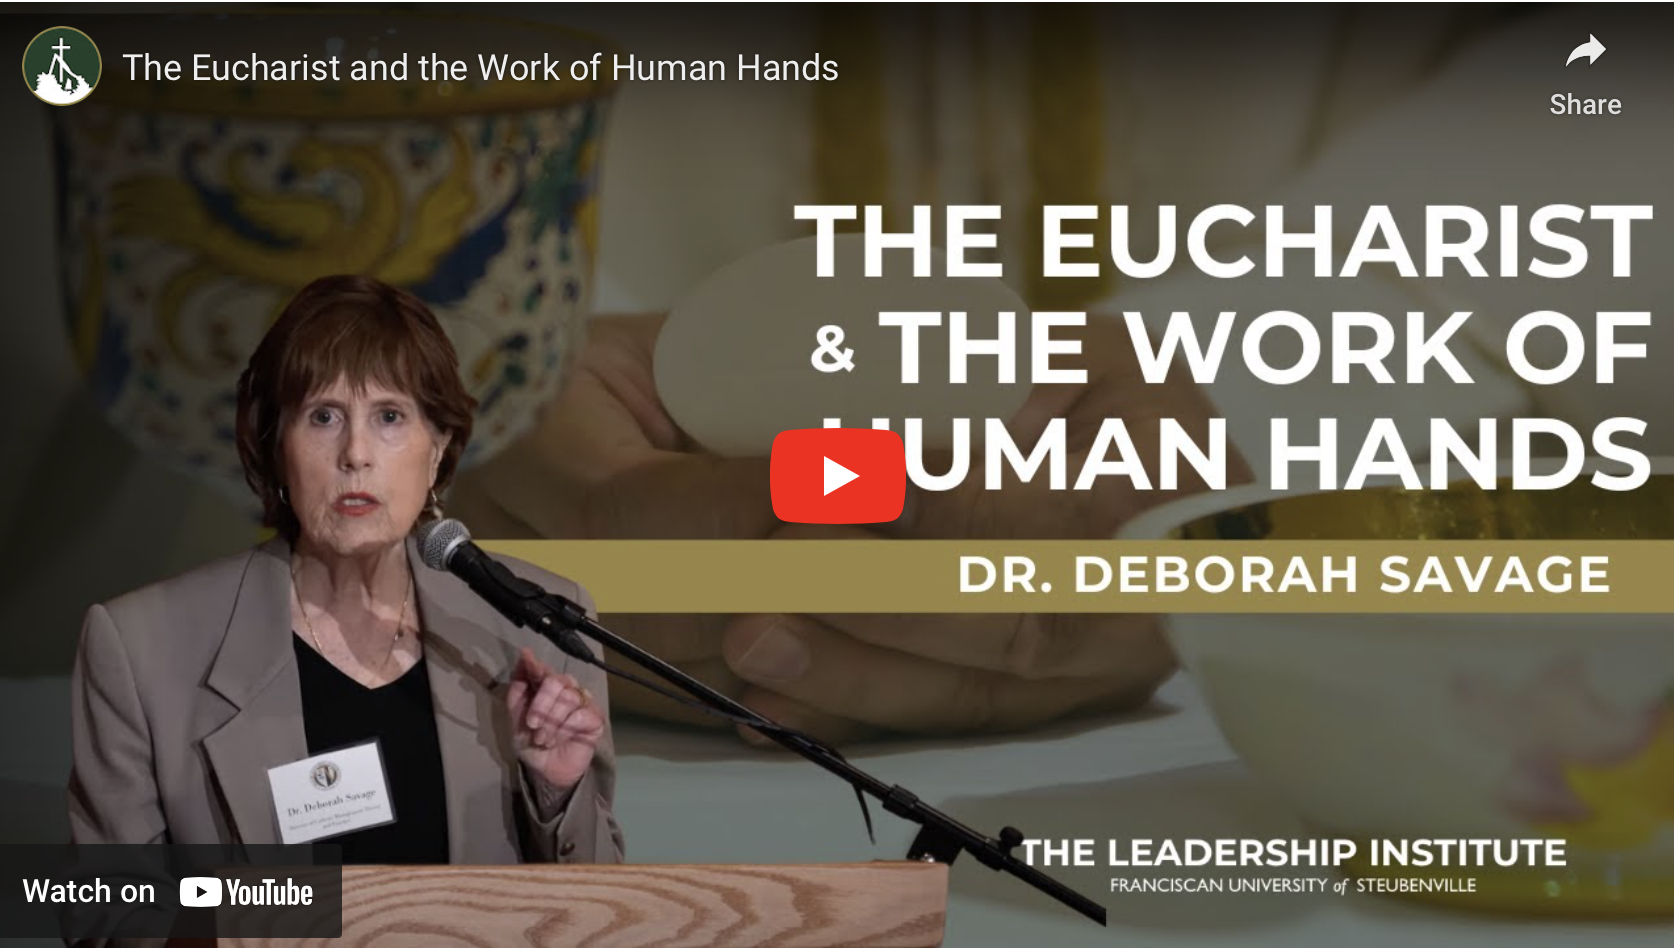 The Eucharist and the Work of Human Hands